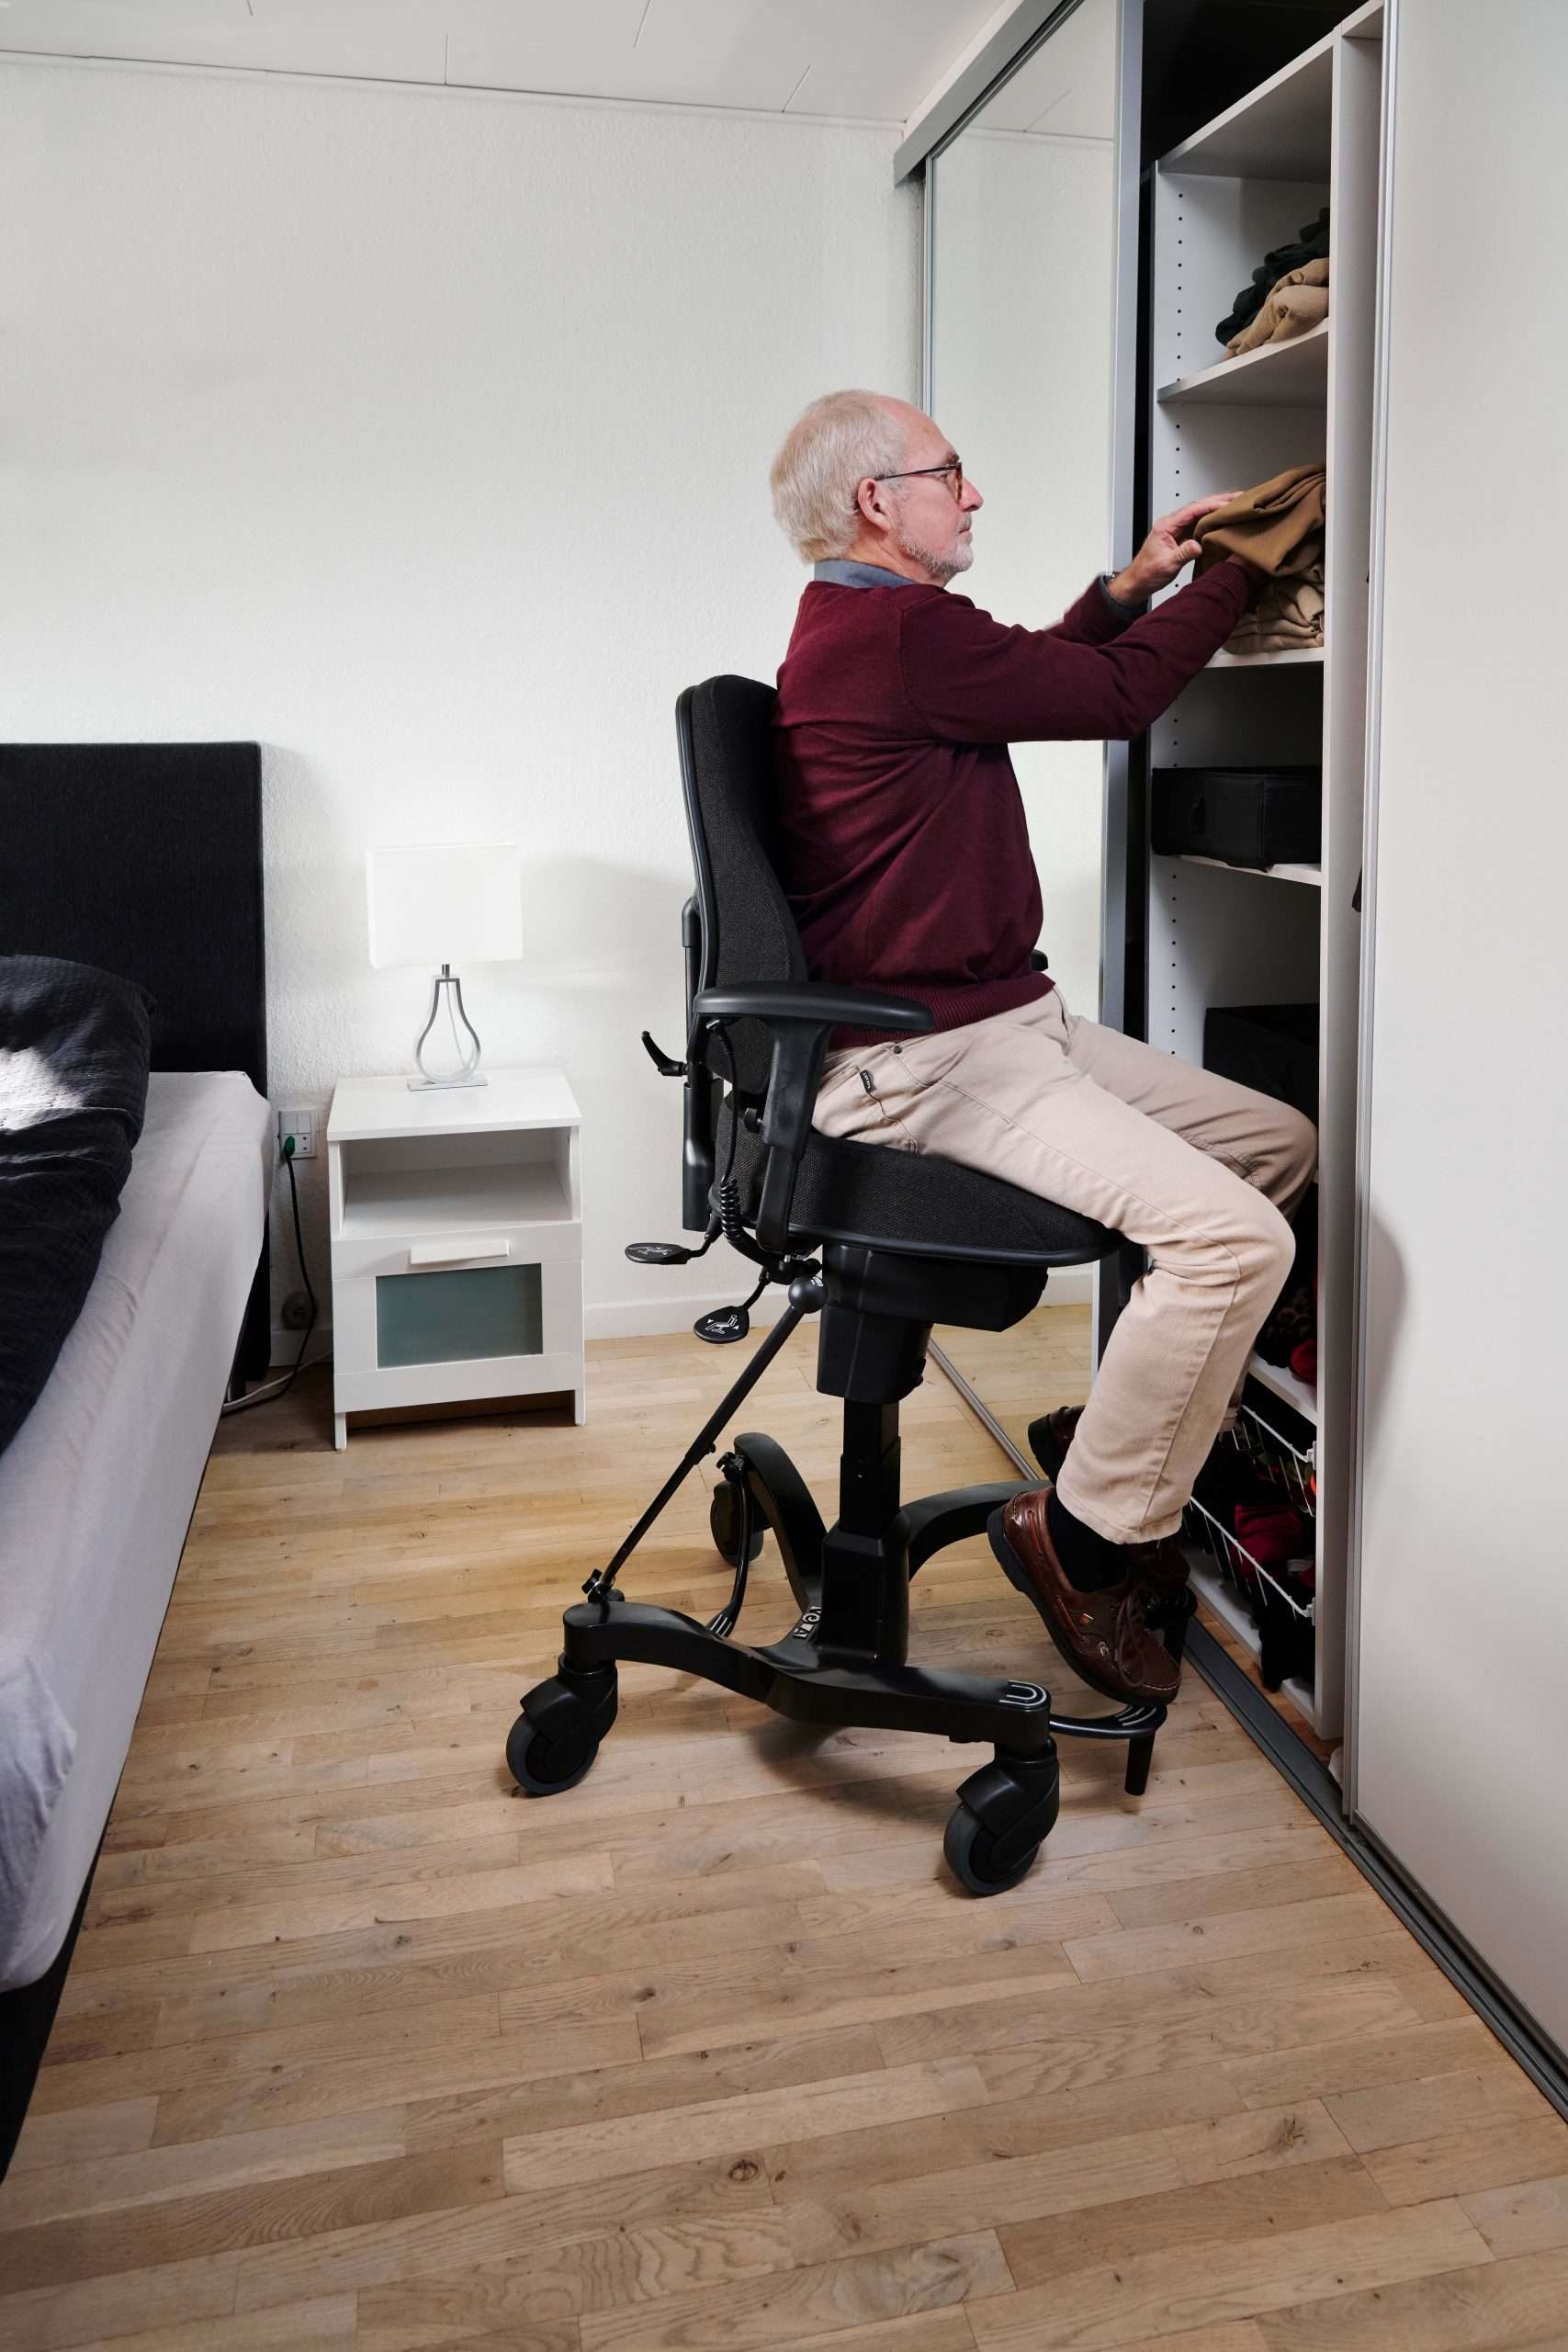 Lifestyle shot of an elderly man in his bedroom sitting on an elevated Vela 700 Tango Activity chair using the raised height to store clothes.